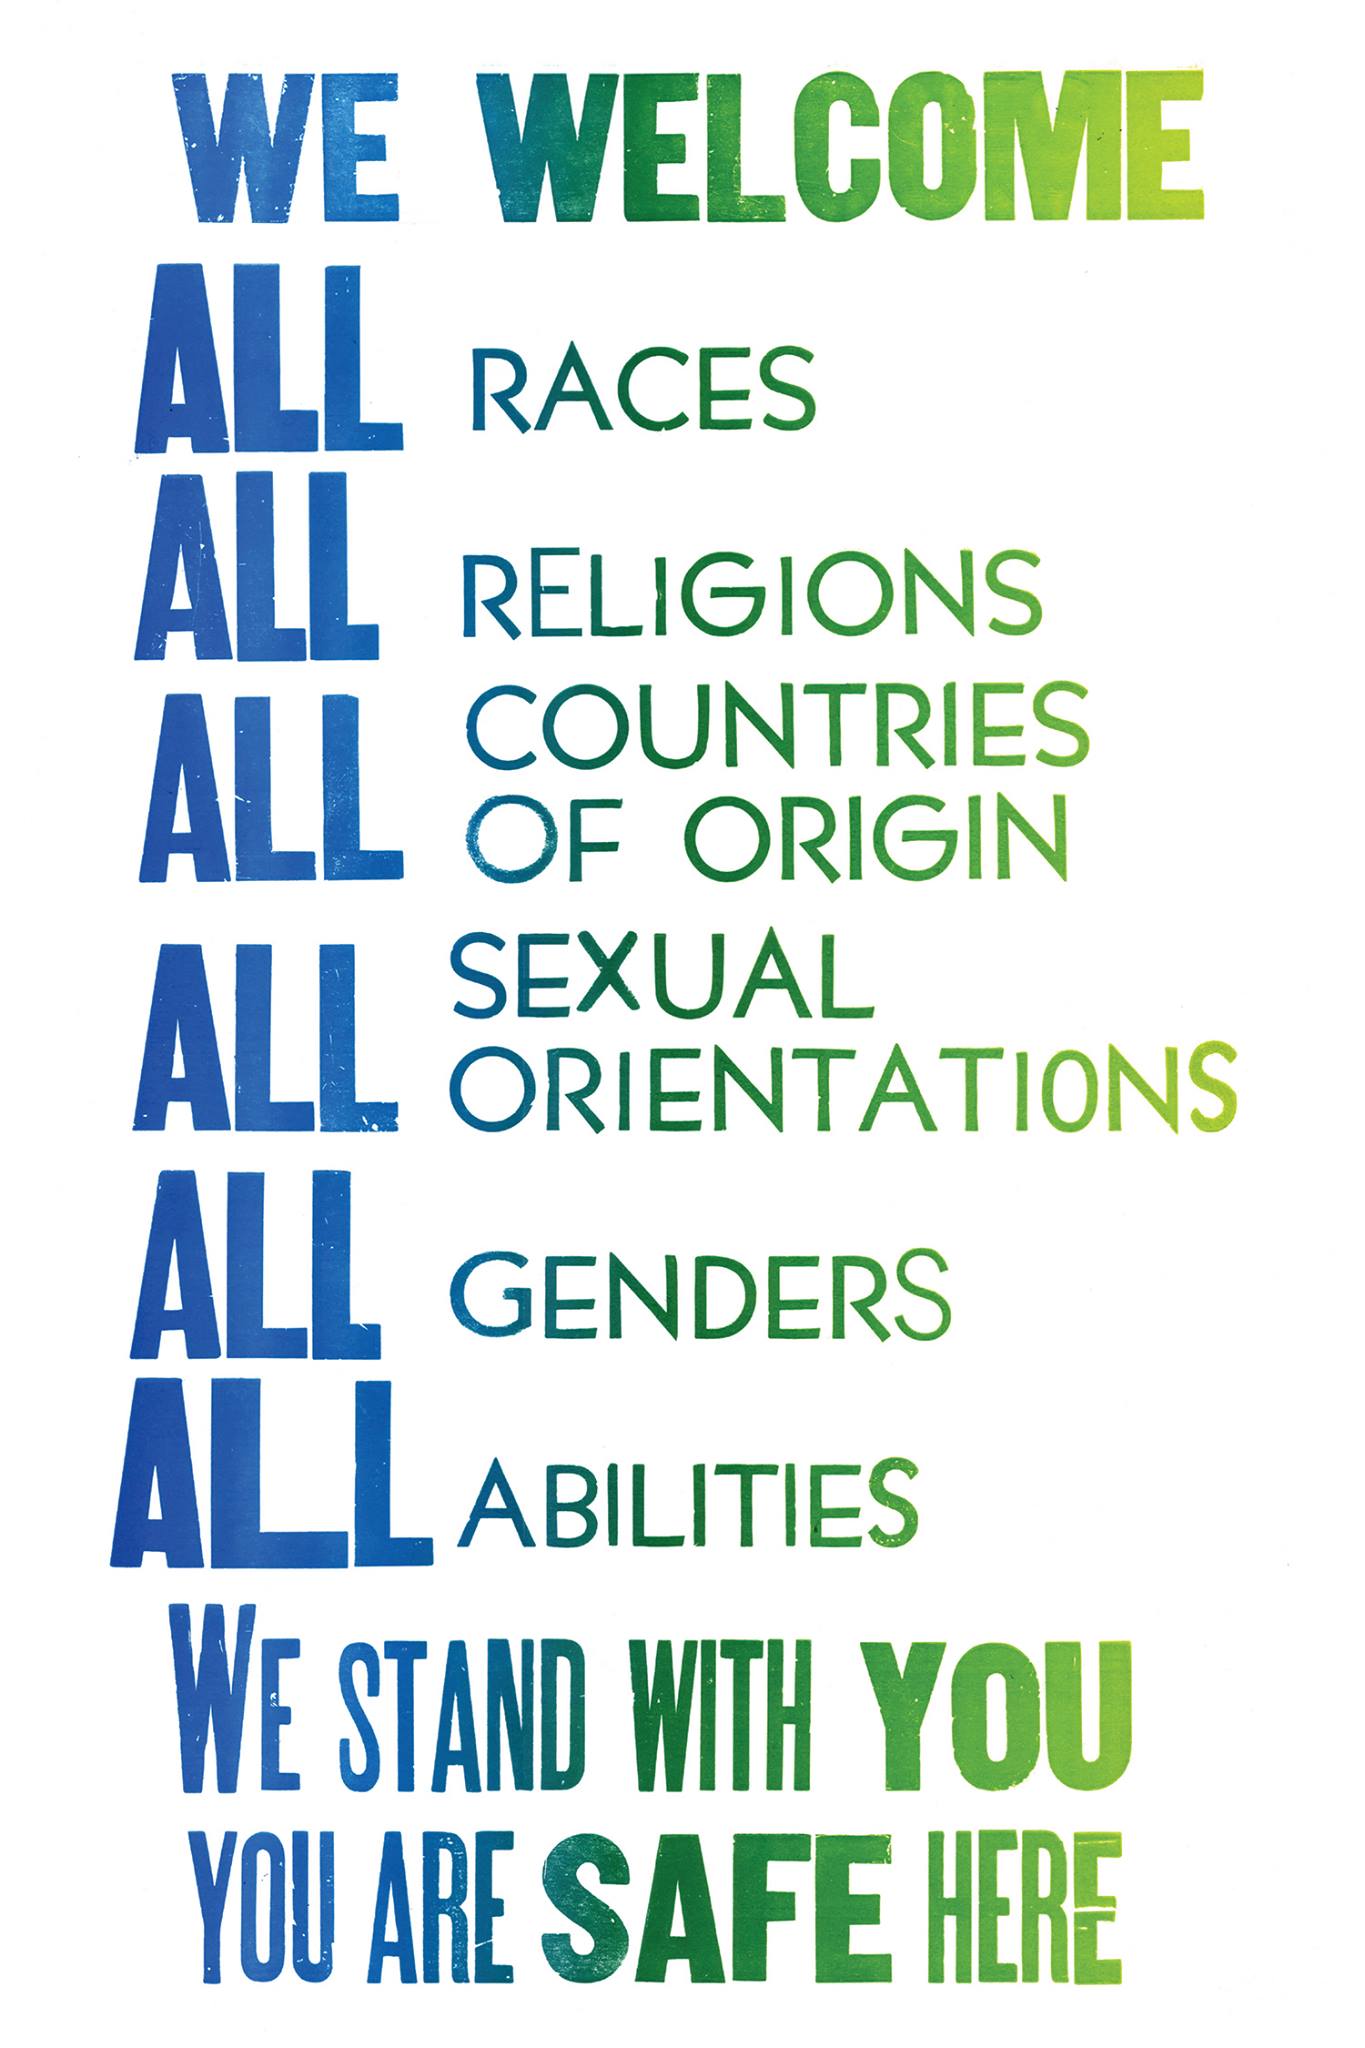 Poster that reads " We welcome all races, all religions, all countries of origin, all sexual orientations, all genders, all abilities. We stand with you. You are safe here."